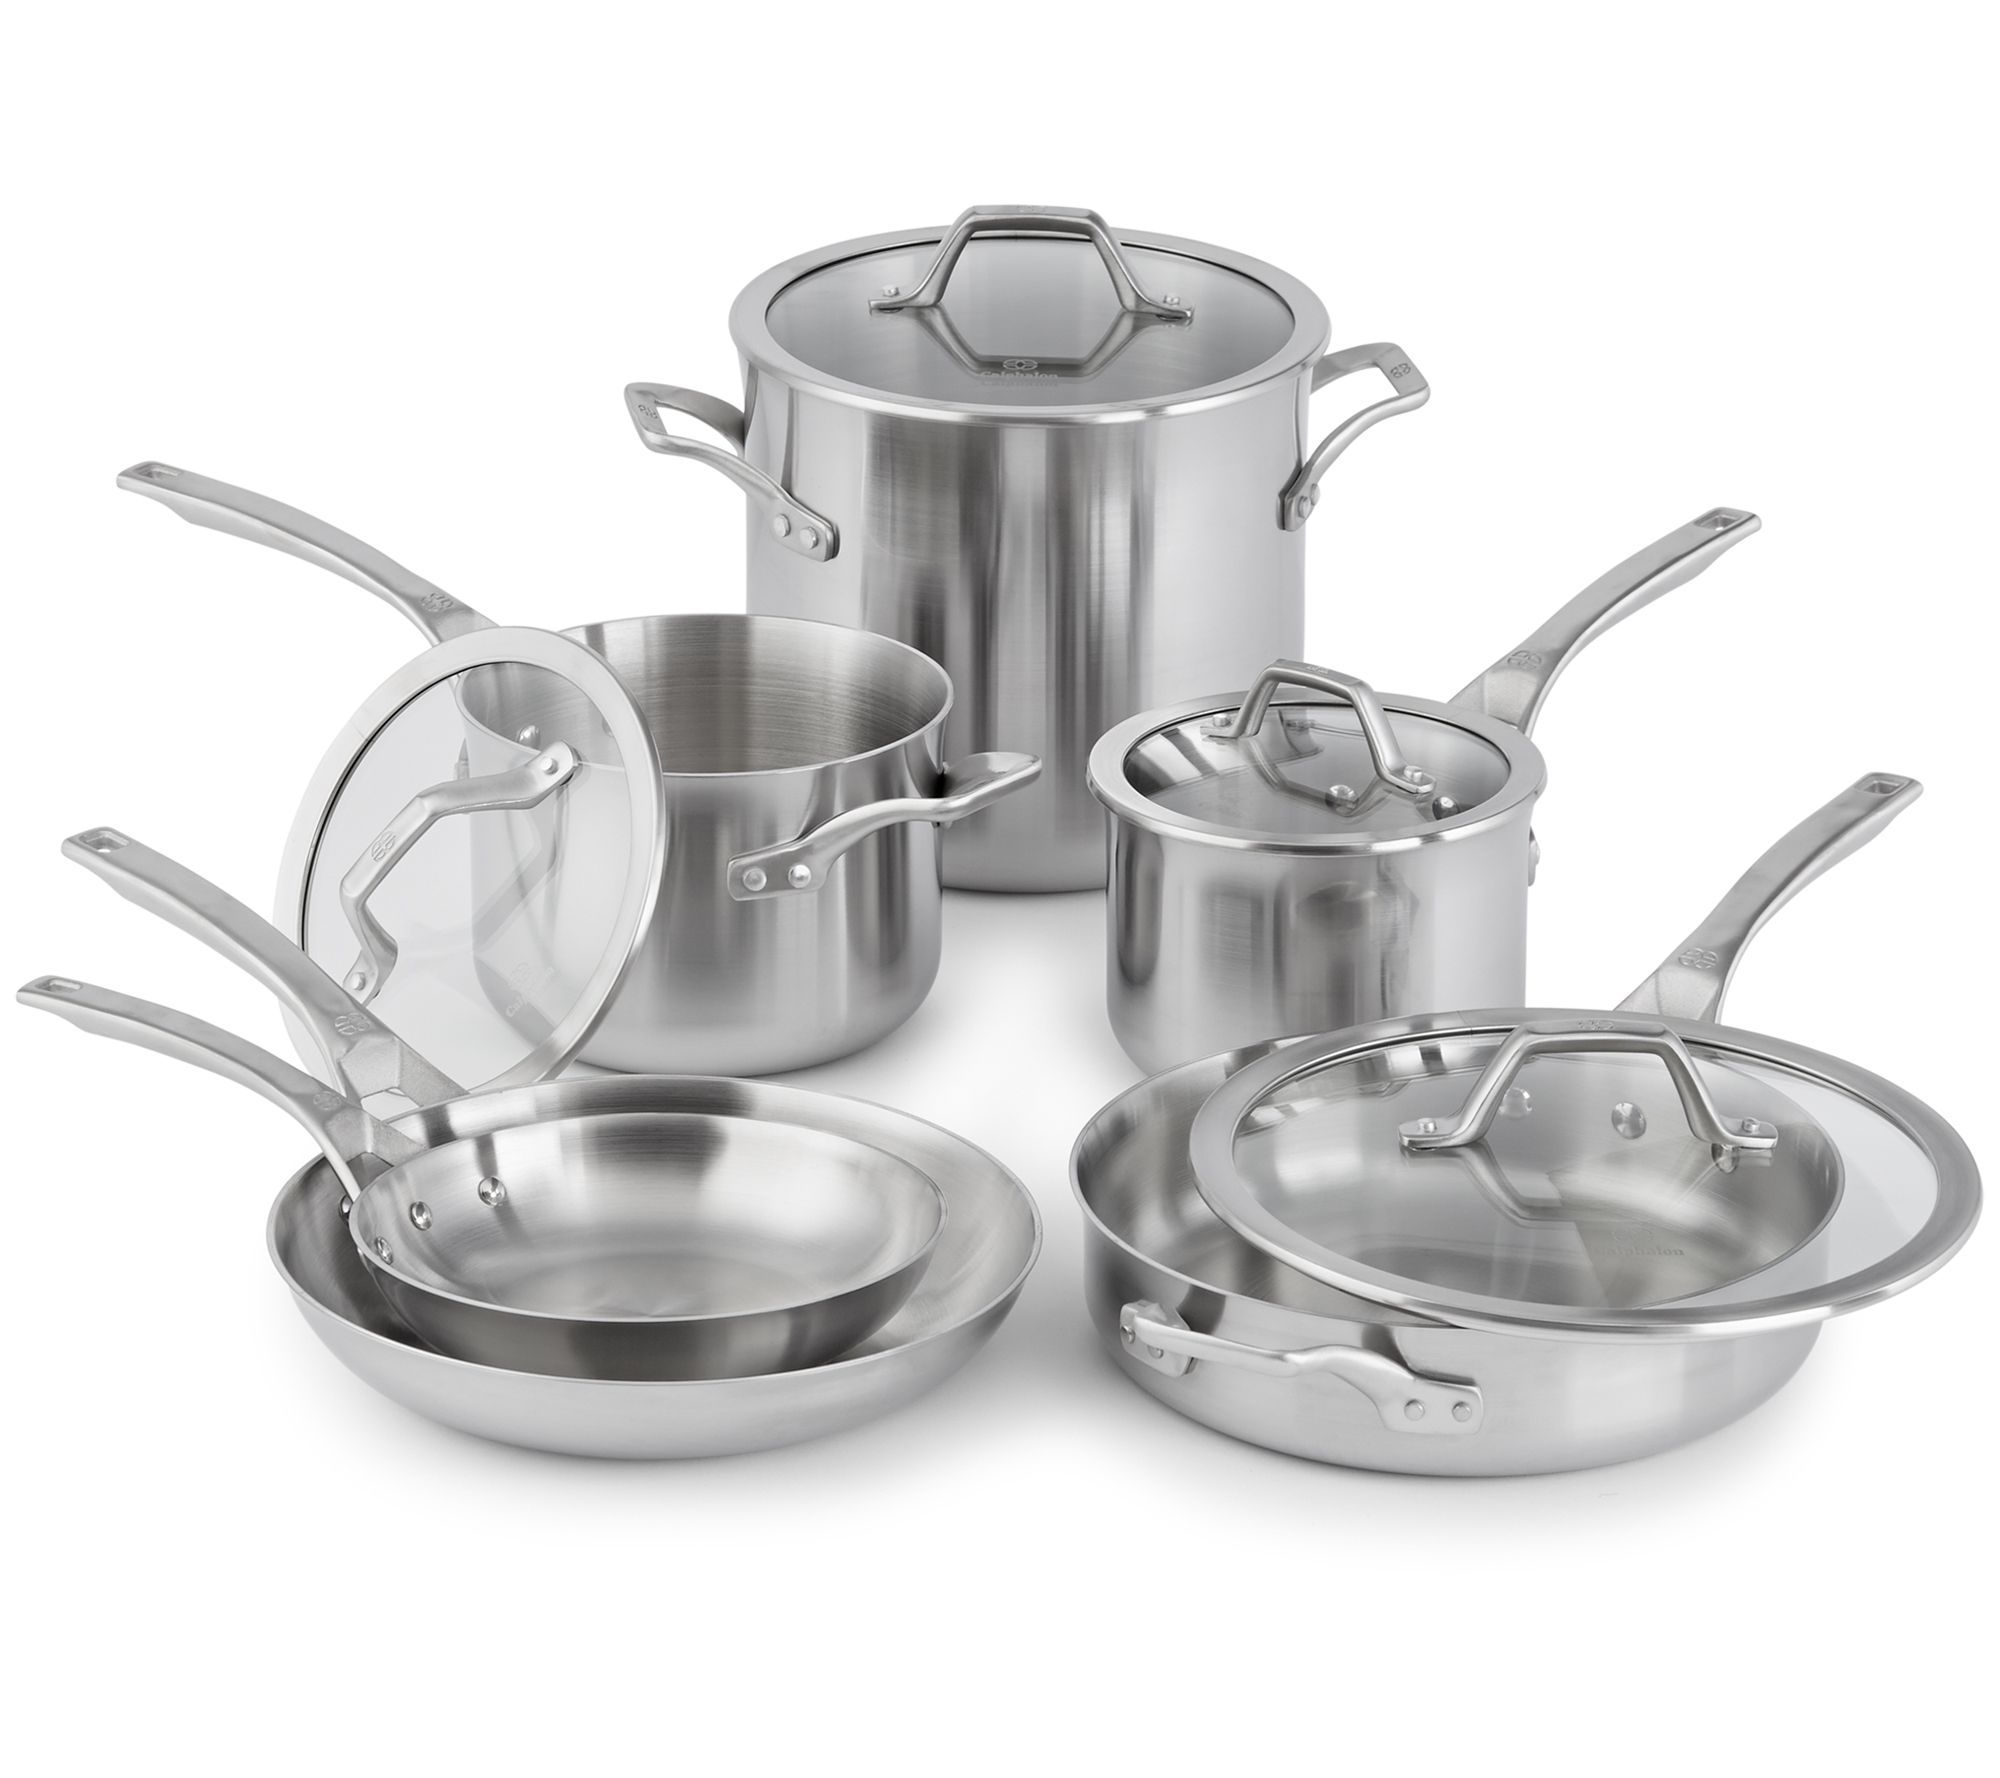 Calphalon Signature 5Ply 10-Piece Stainless Steel Cookware Set | QVC